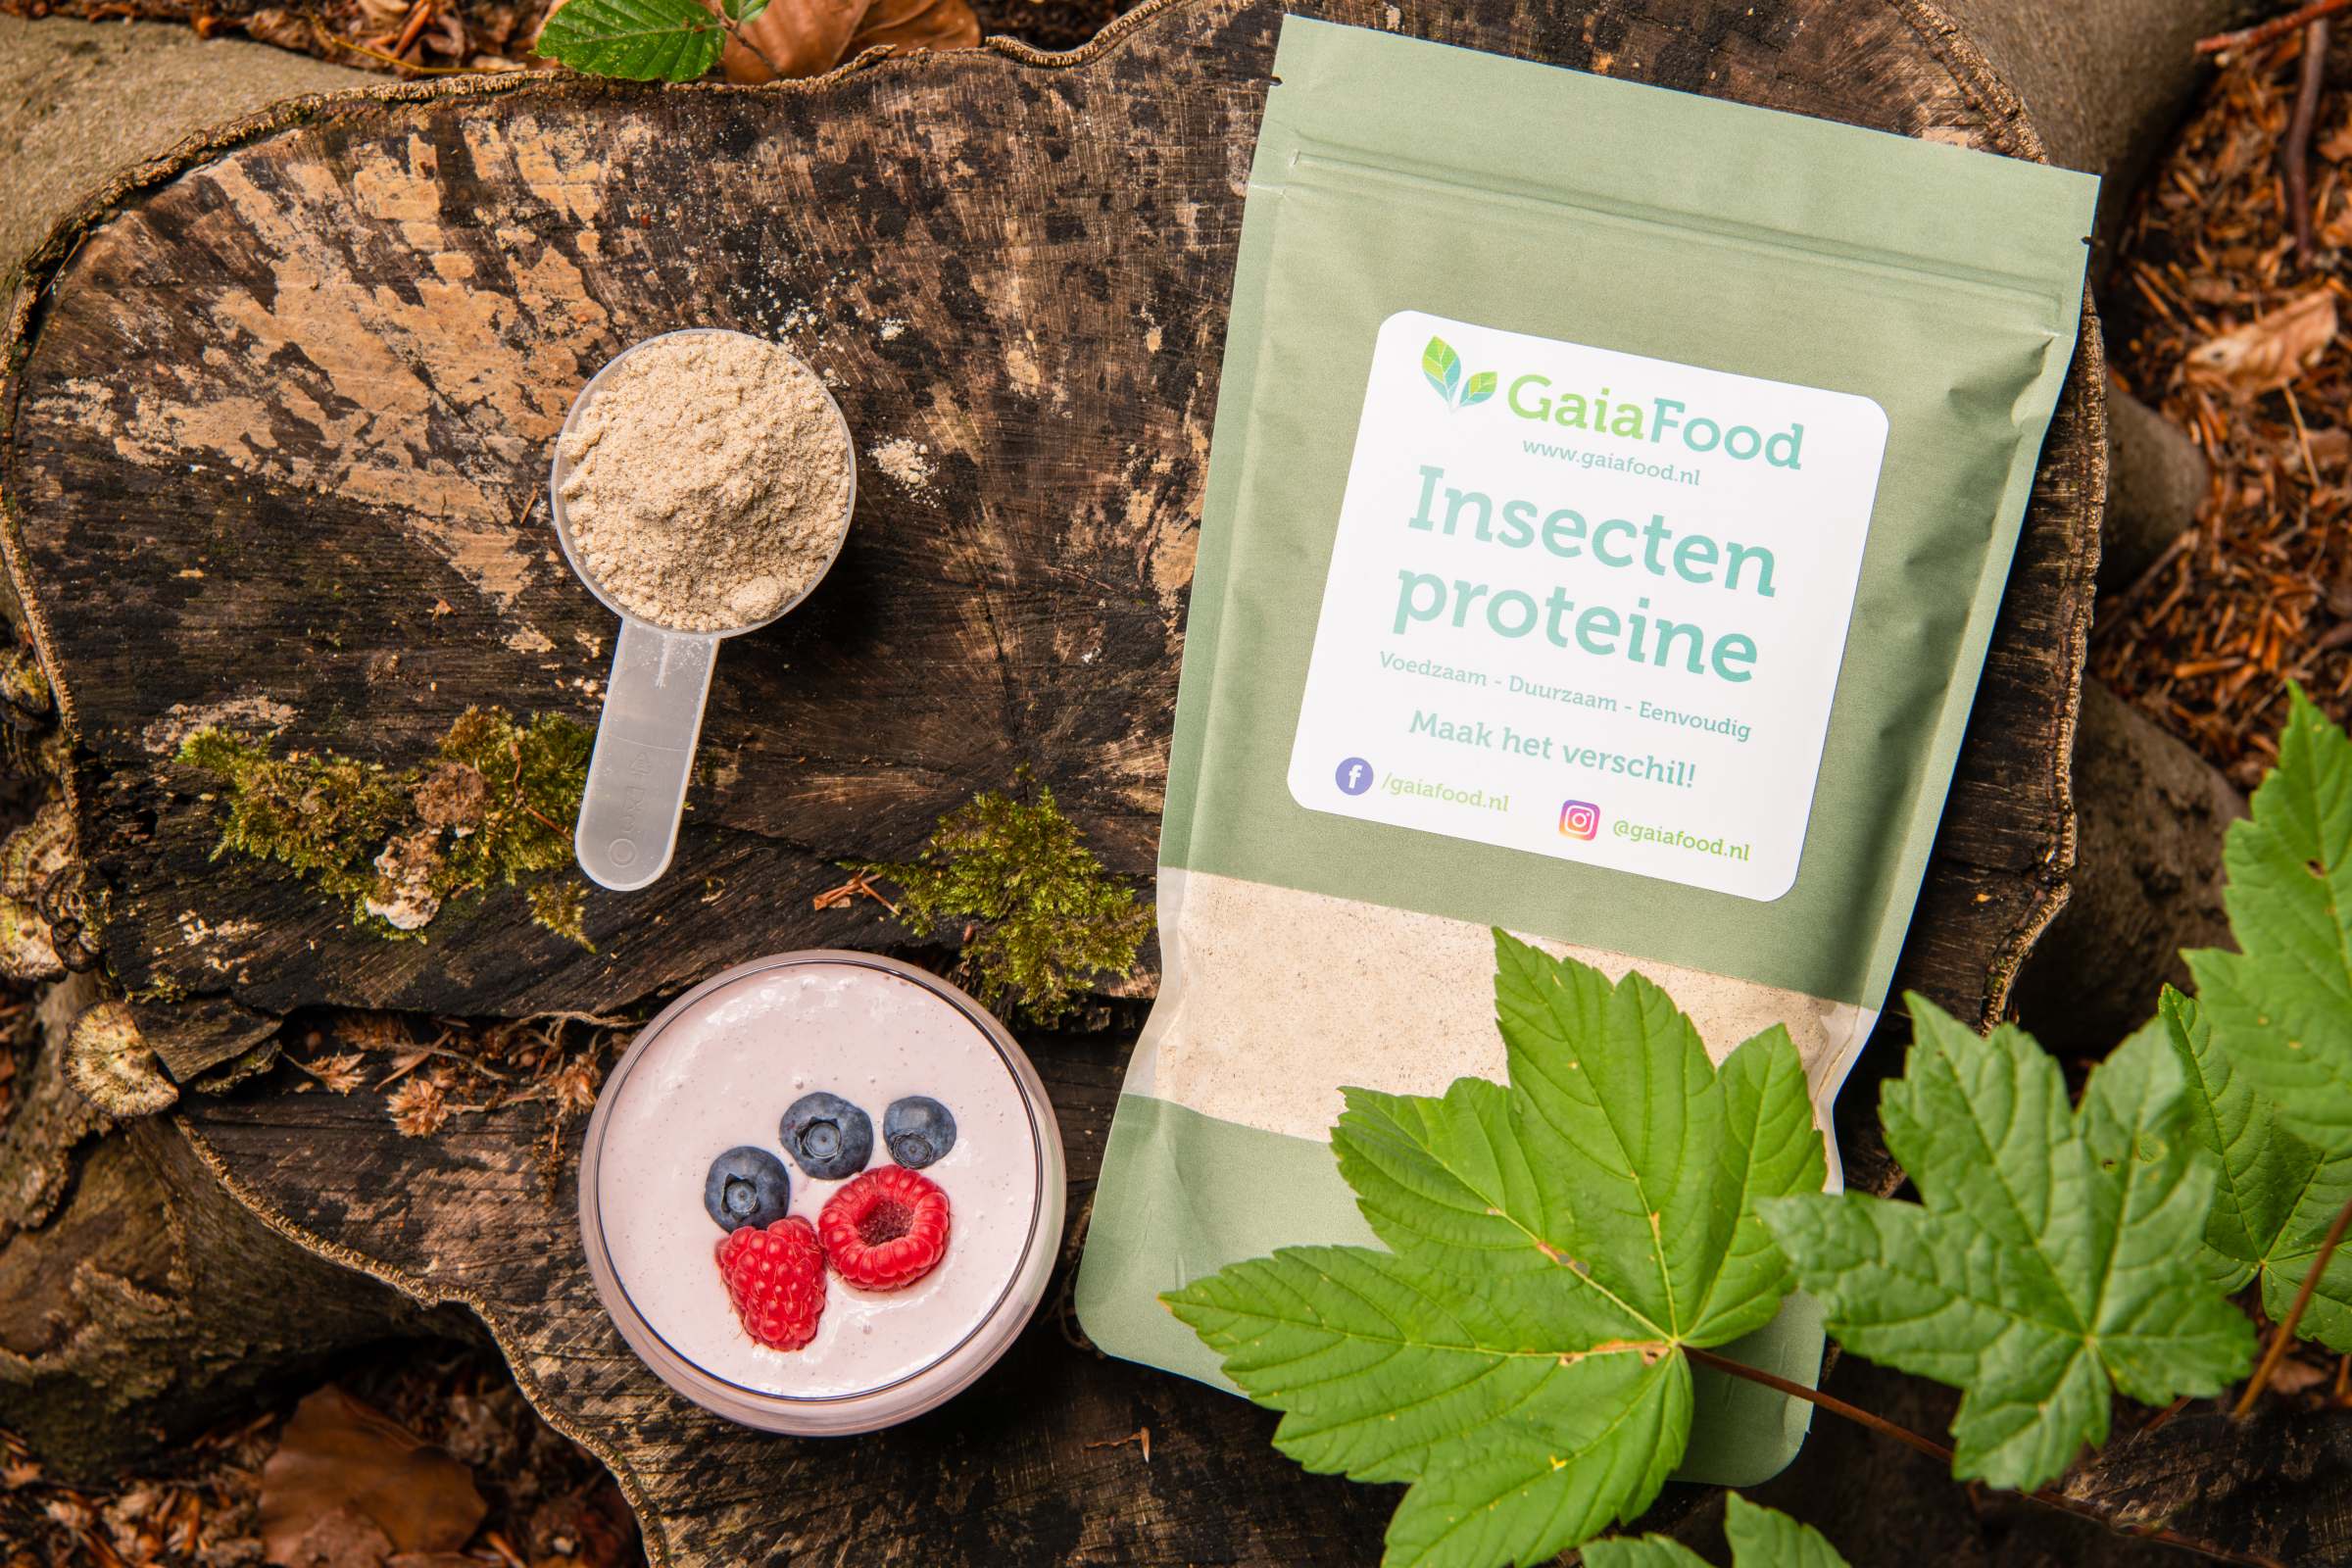 Gaia Insect Protein